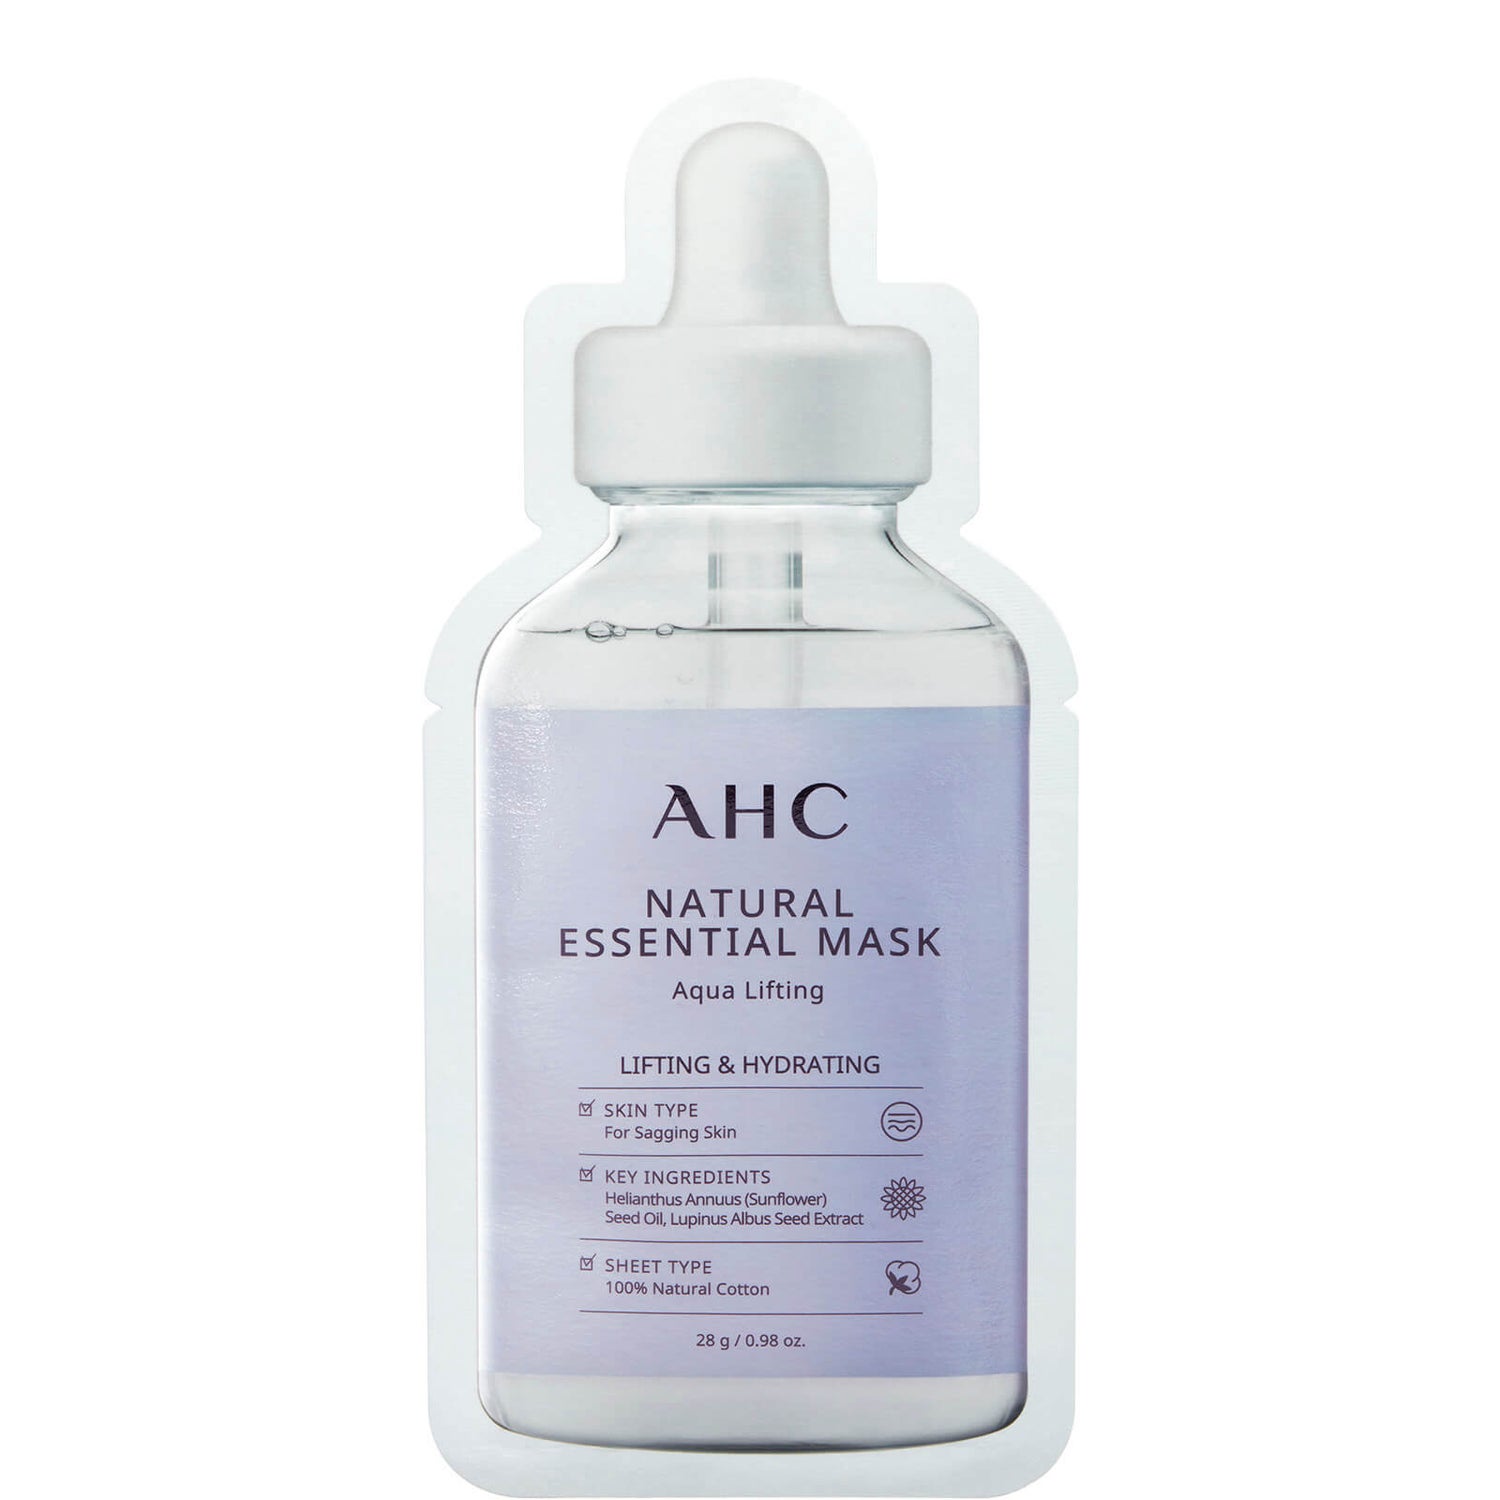 AHC Natural Essential Face Mask Hydrating and Lifting for Tired Skin